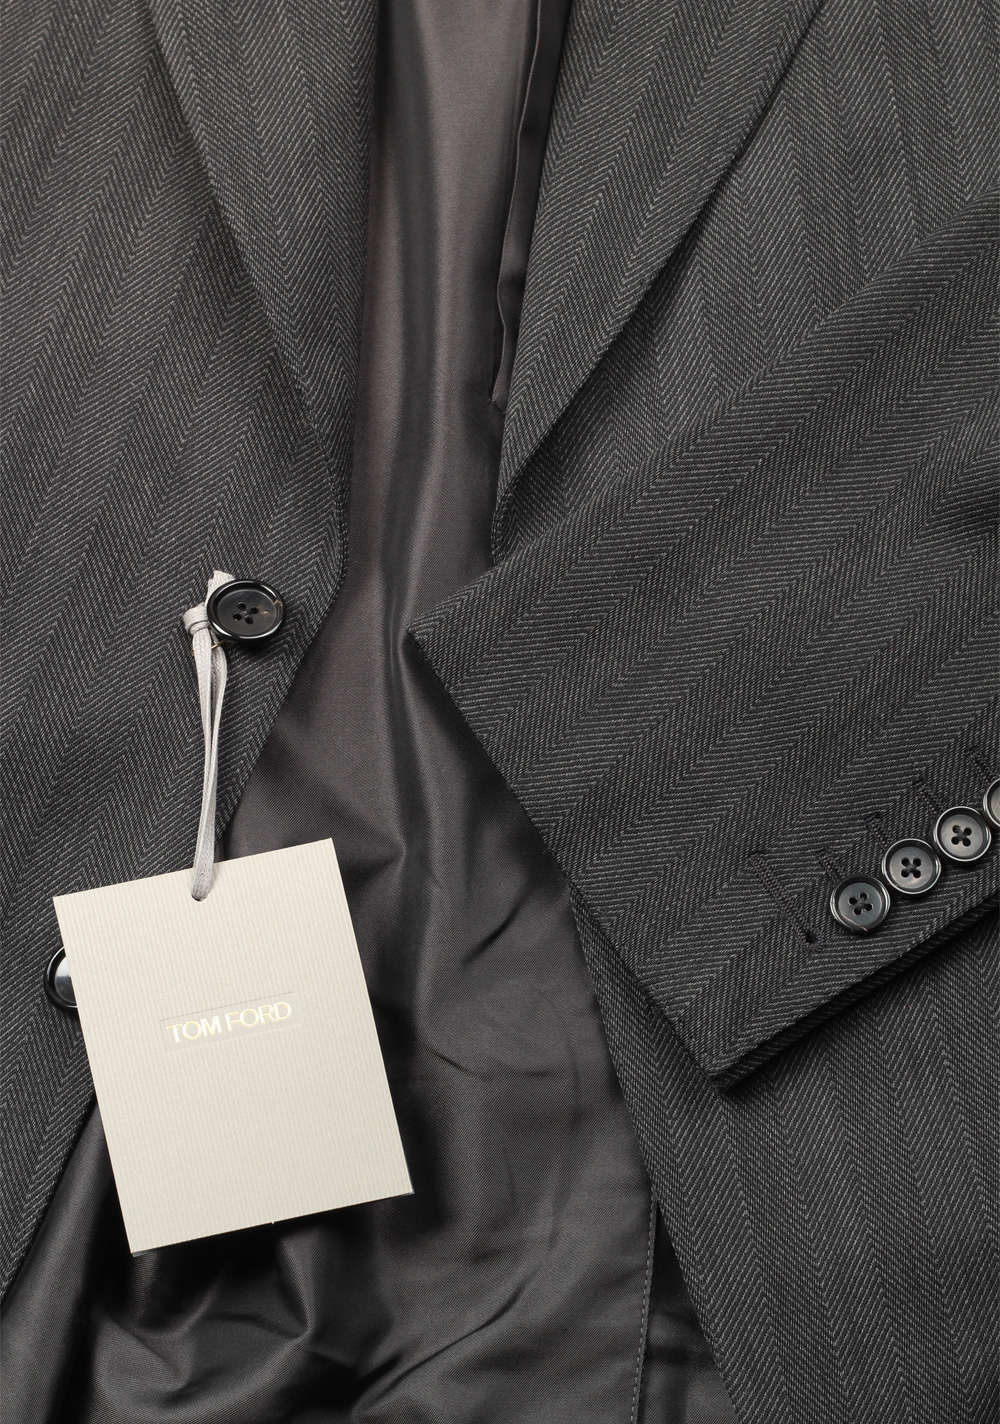 TOM FORD Shelton Gray Suit Size 48 / 38R U.S. In Wool | Costume Limité